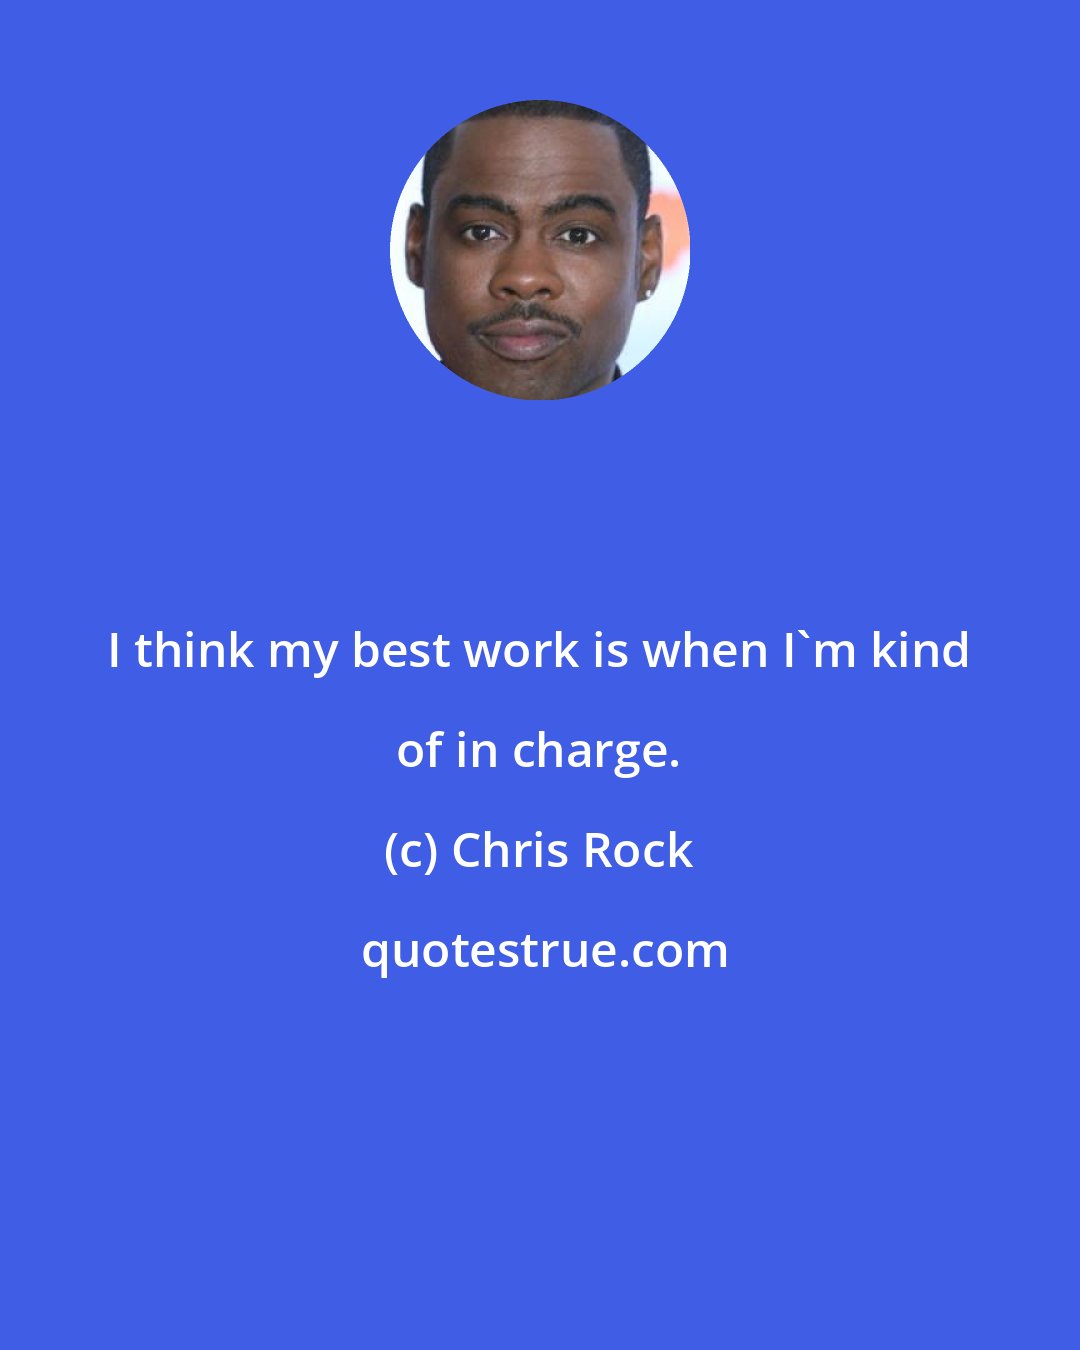 Chris Rock: I think my best work is when I'm kind of in charge.